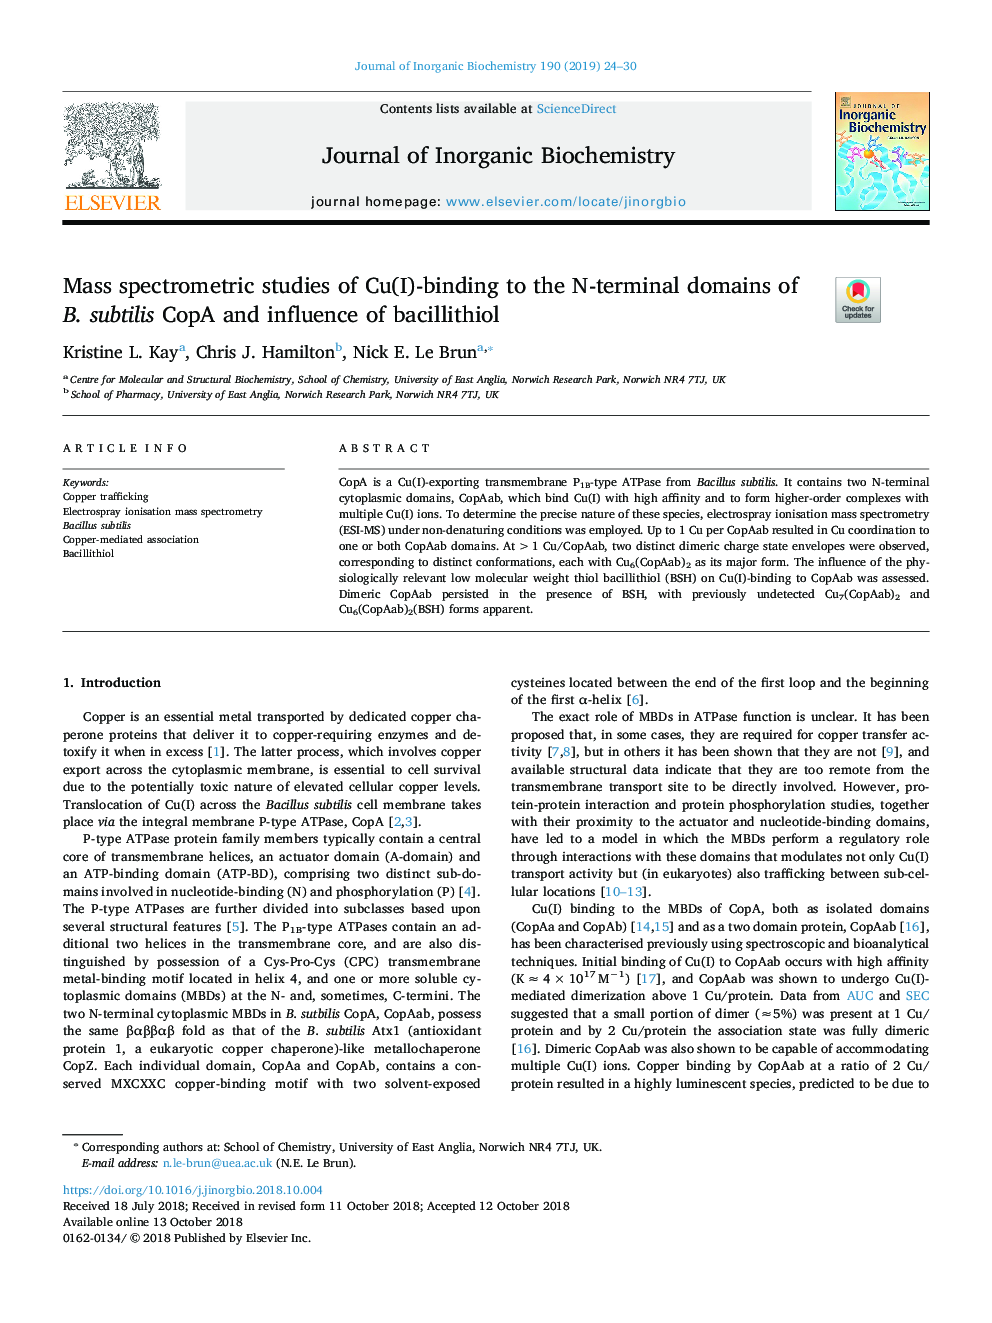 Mass spectrometric studies of Cu(I)-binding to the N-terminal domains of B. subtilis CopA and influence of bacillithiol